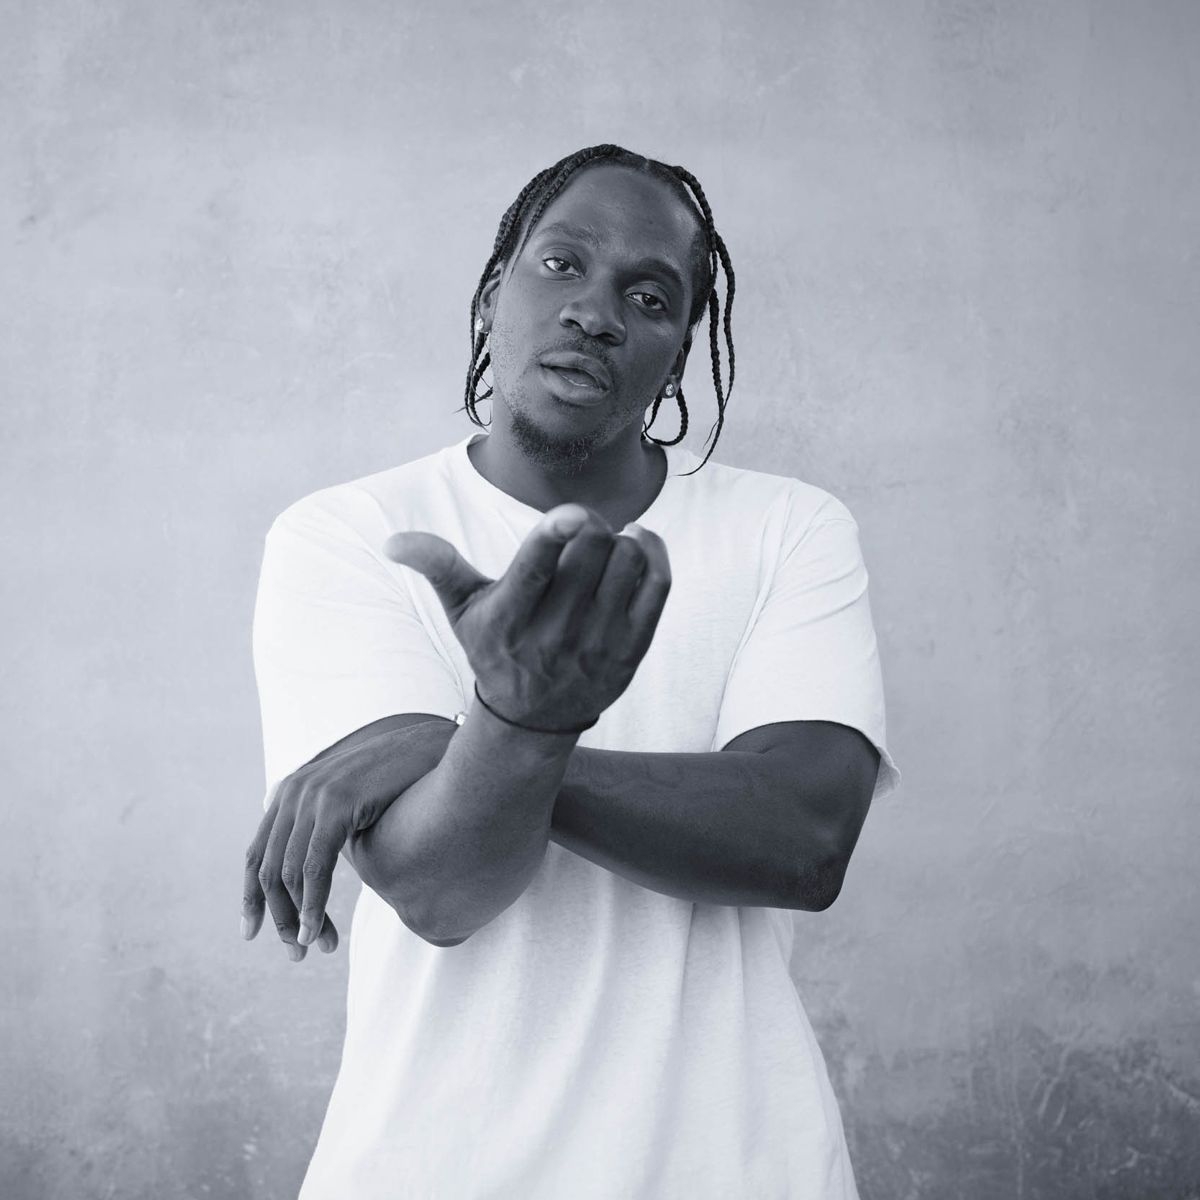 The King Of Eqt – Pusha T Interview4